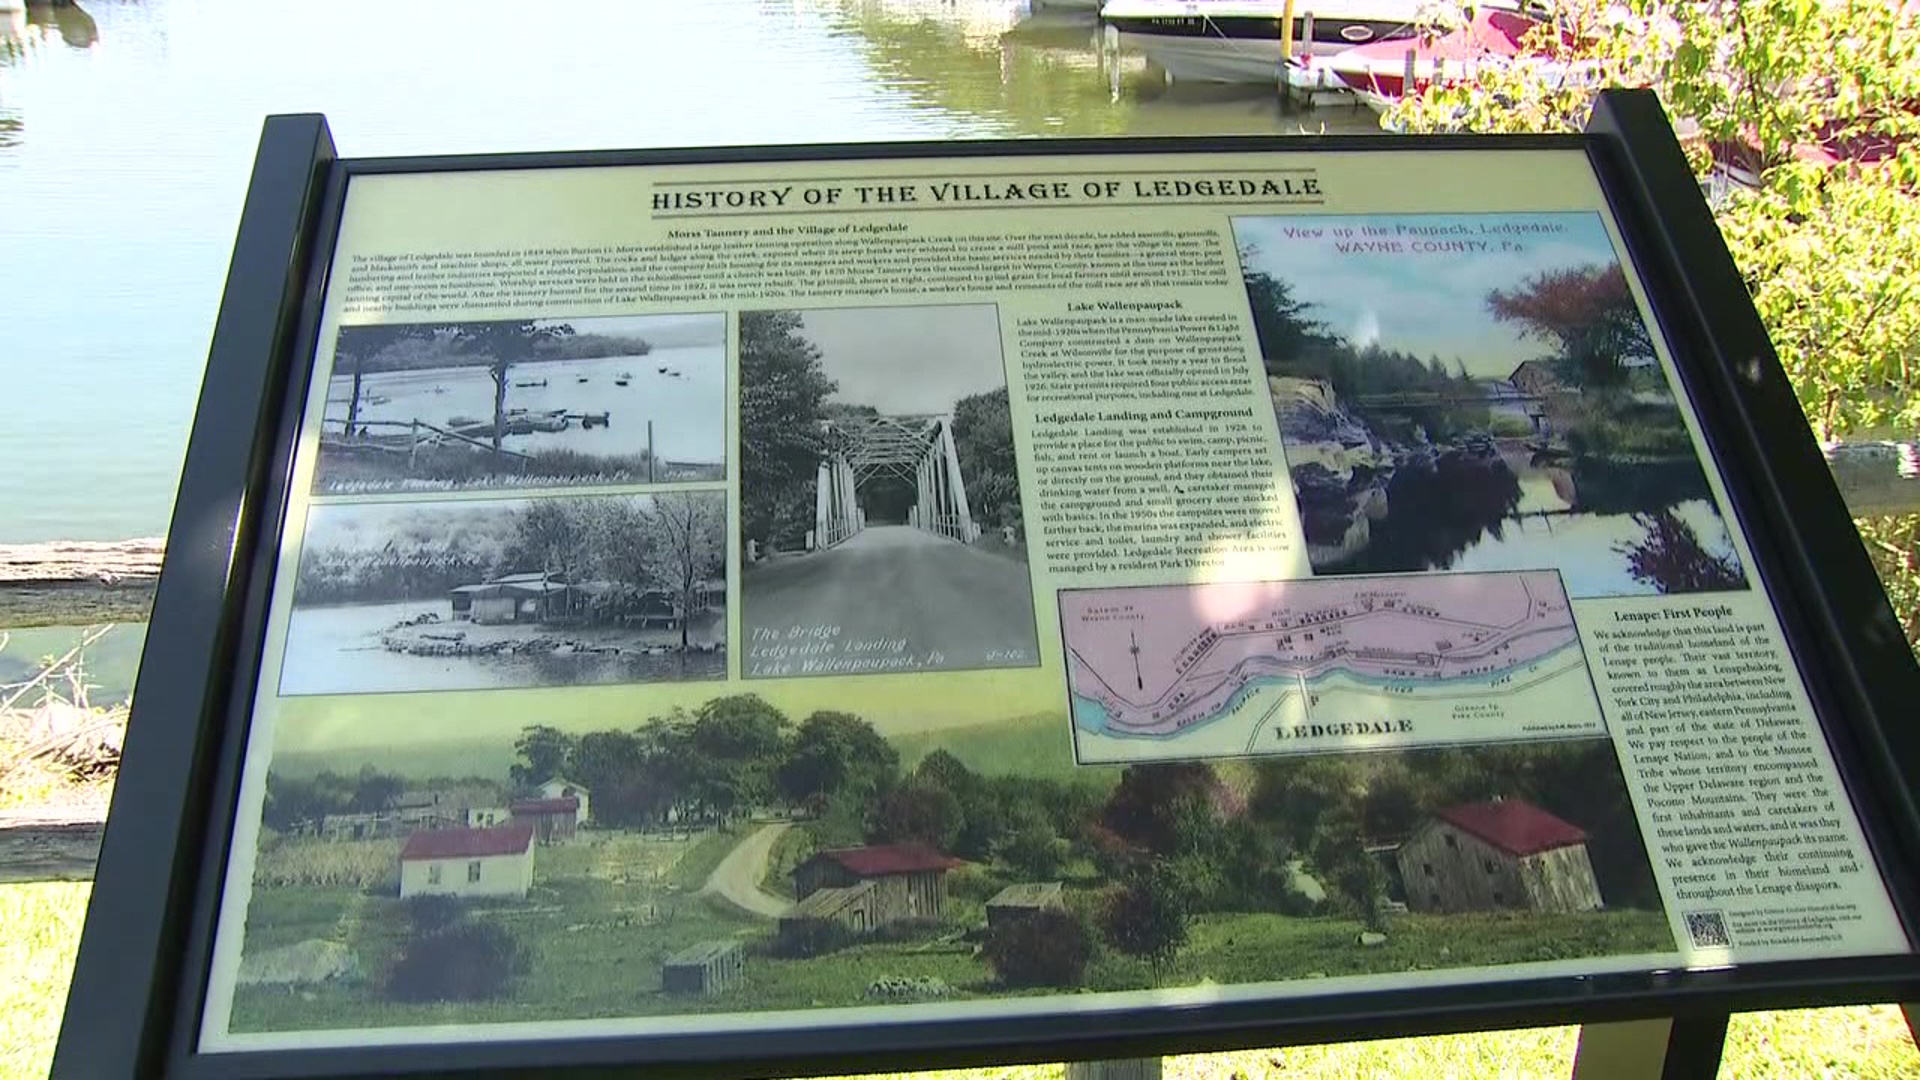 Newswatch 16's Emily Kress tells us more about the village of Ledgedale.